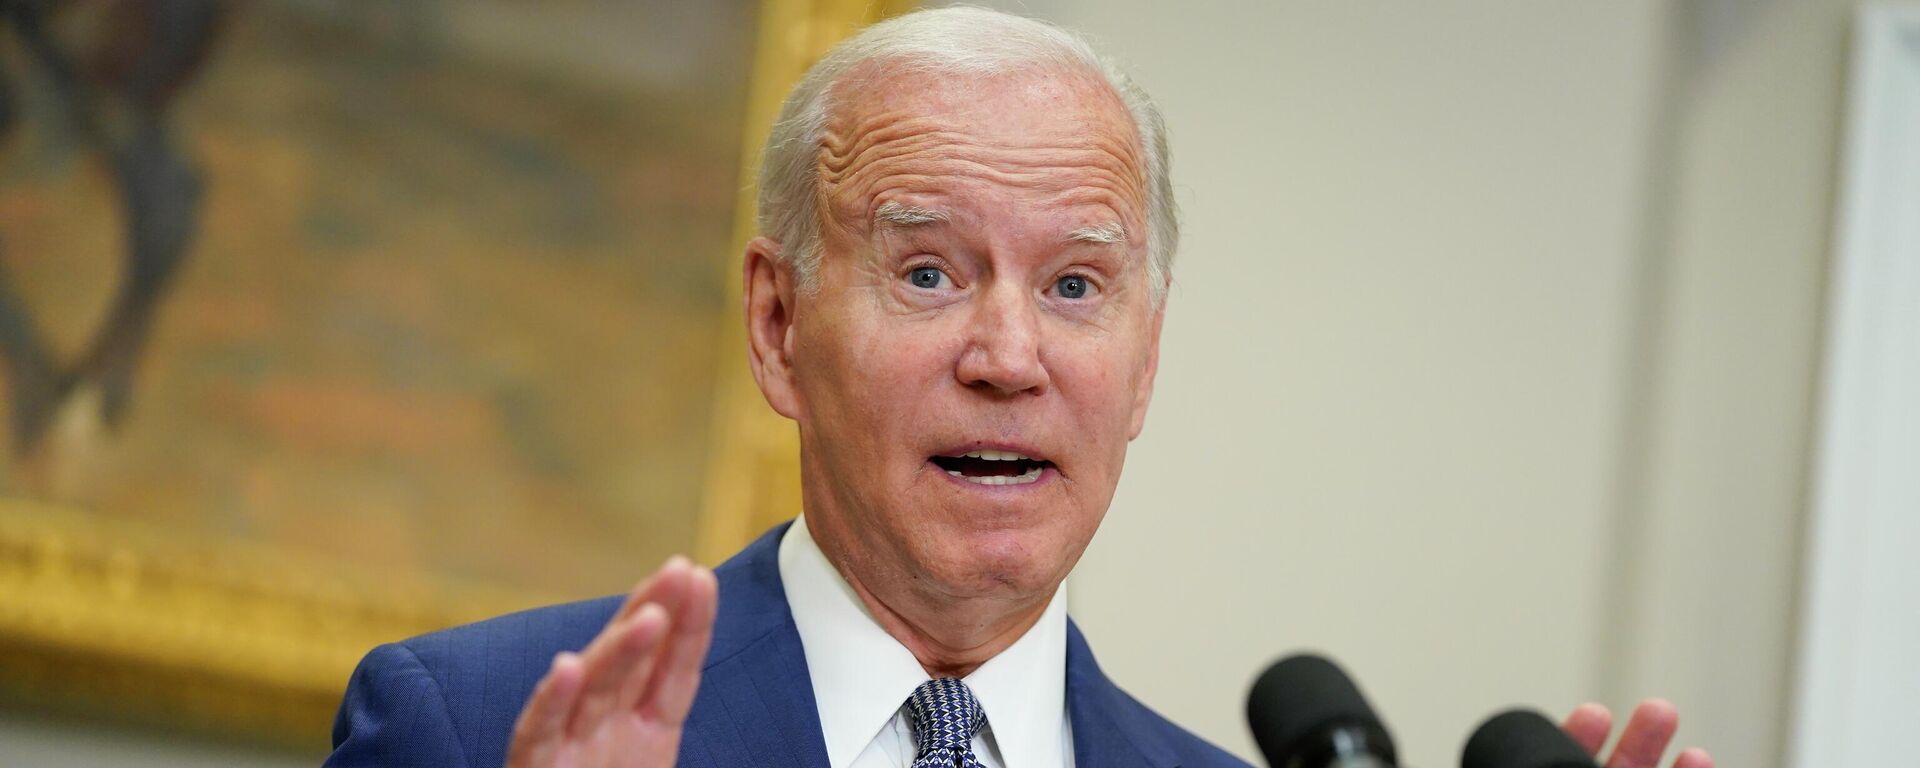 President Joe Biden speaks about abortion access during an event in the Roosevelt Room of the White House, Friday, July 8, 2022, in Washington - Sputnik International, 1920, 04.11.2022